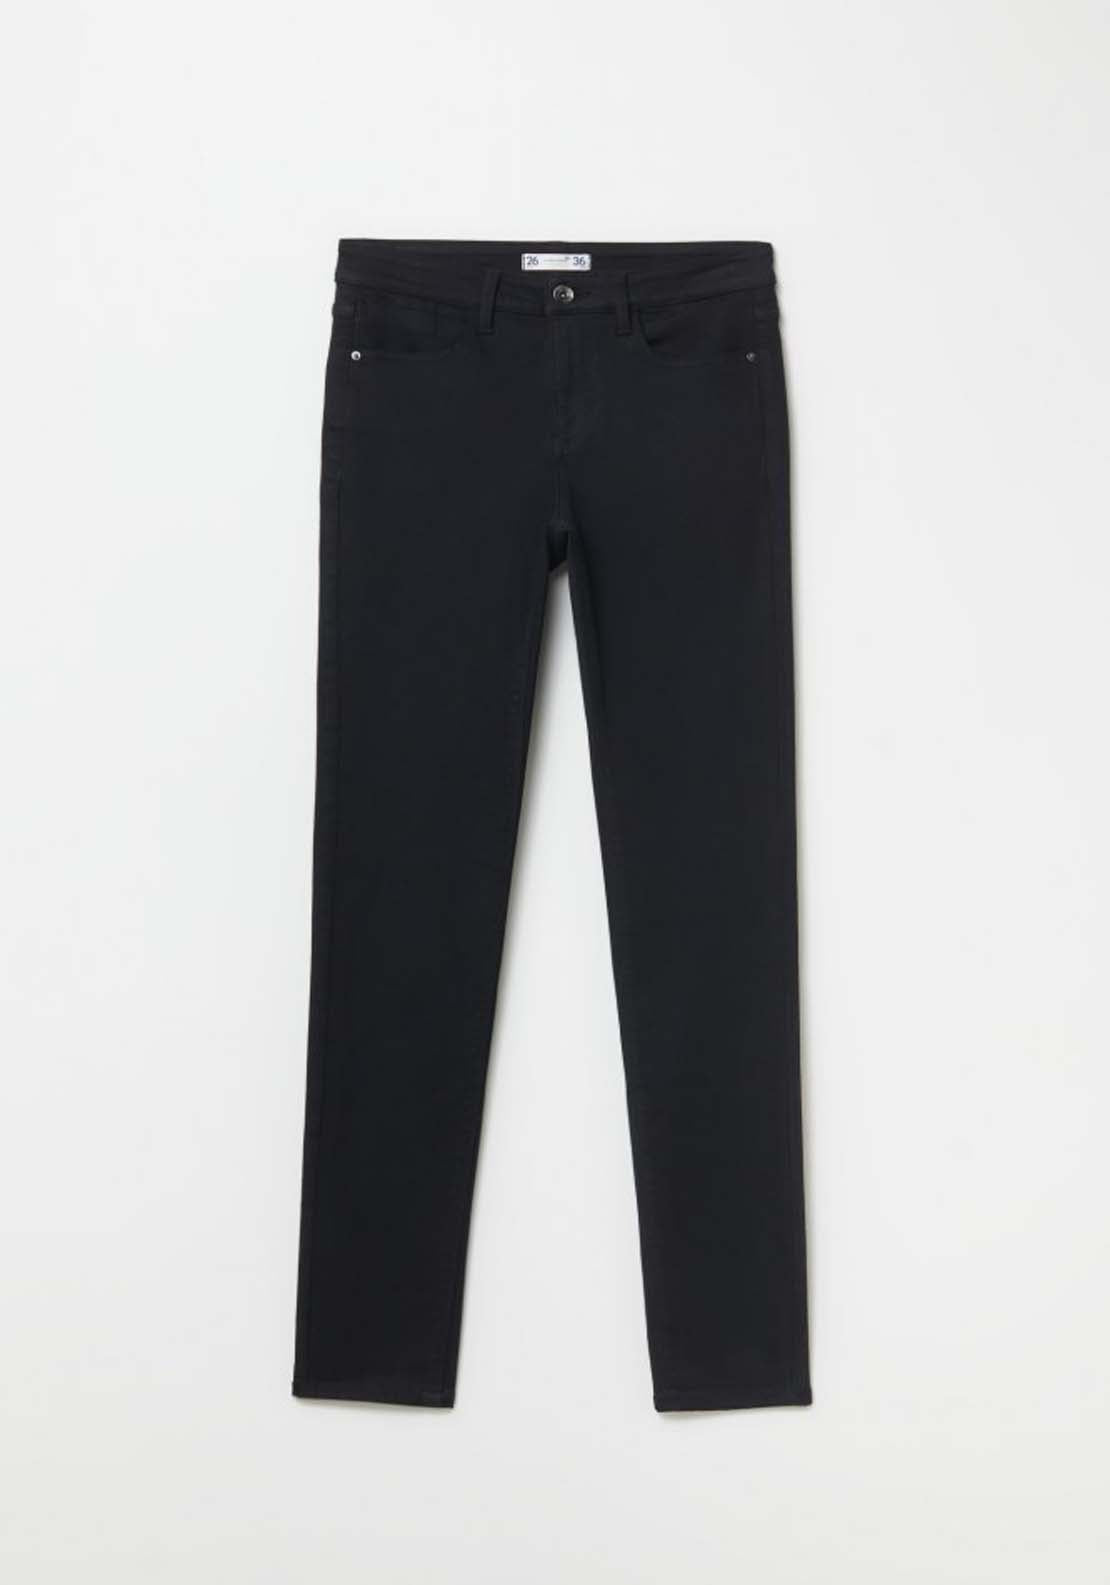 Sfera Coloured skinny jeans - Black 4 Shaws Department Stores